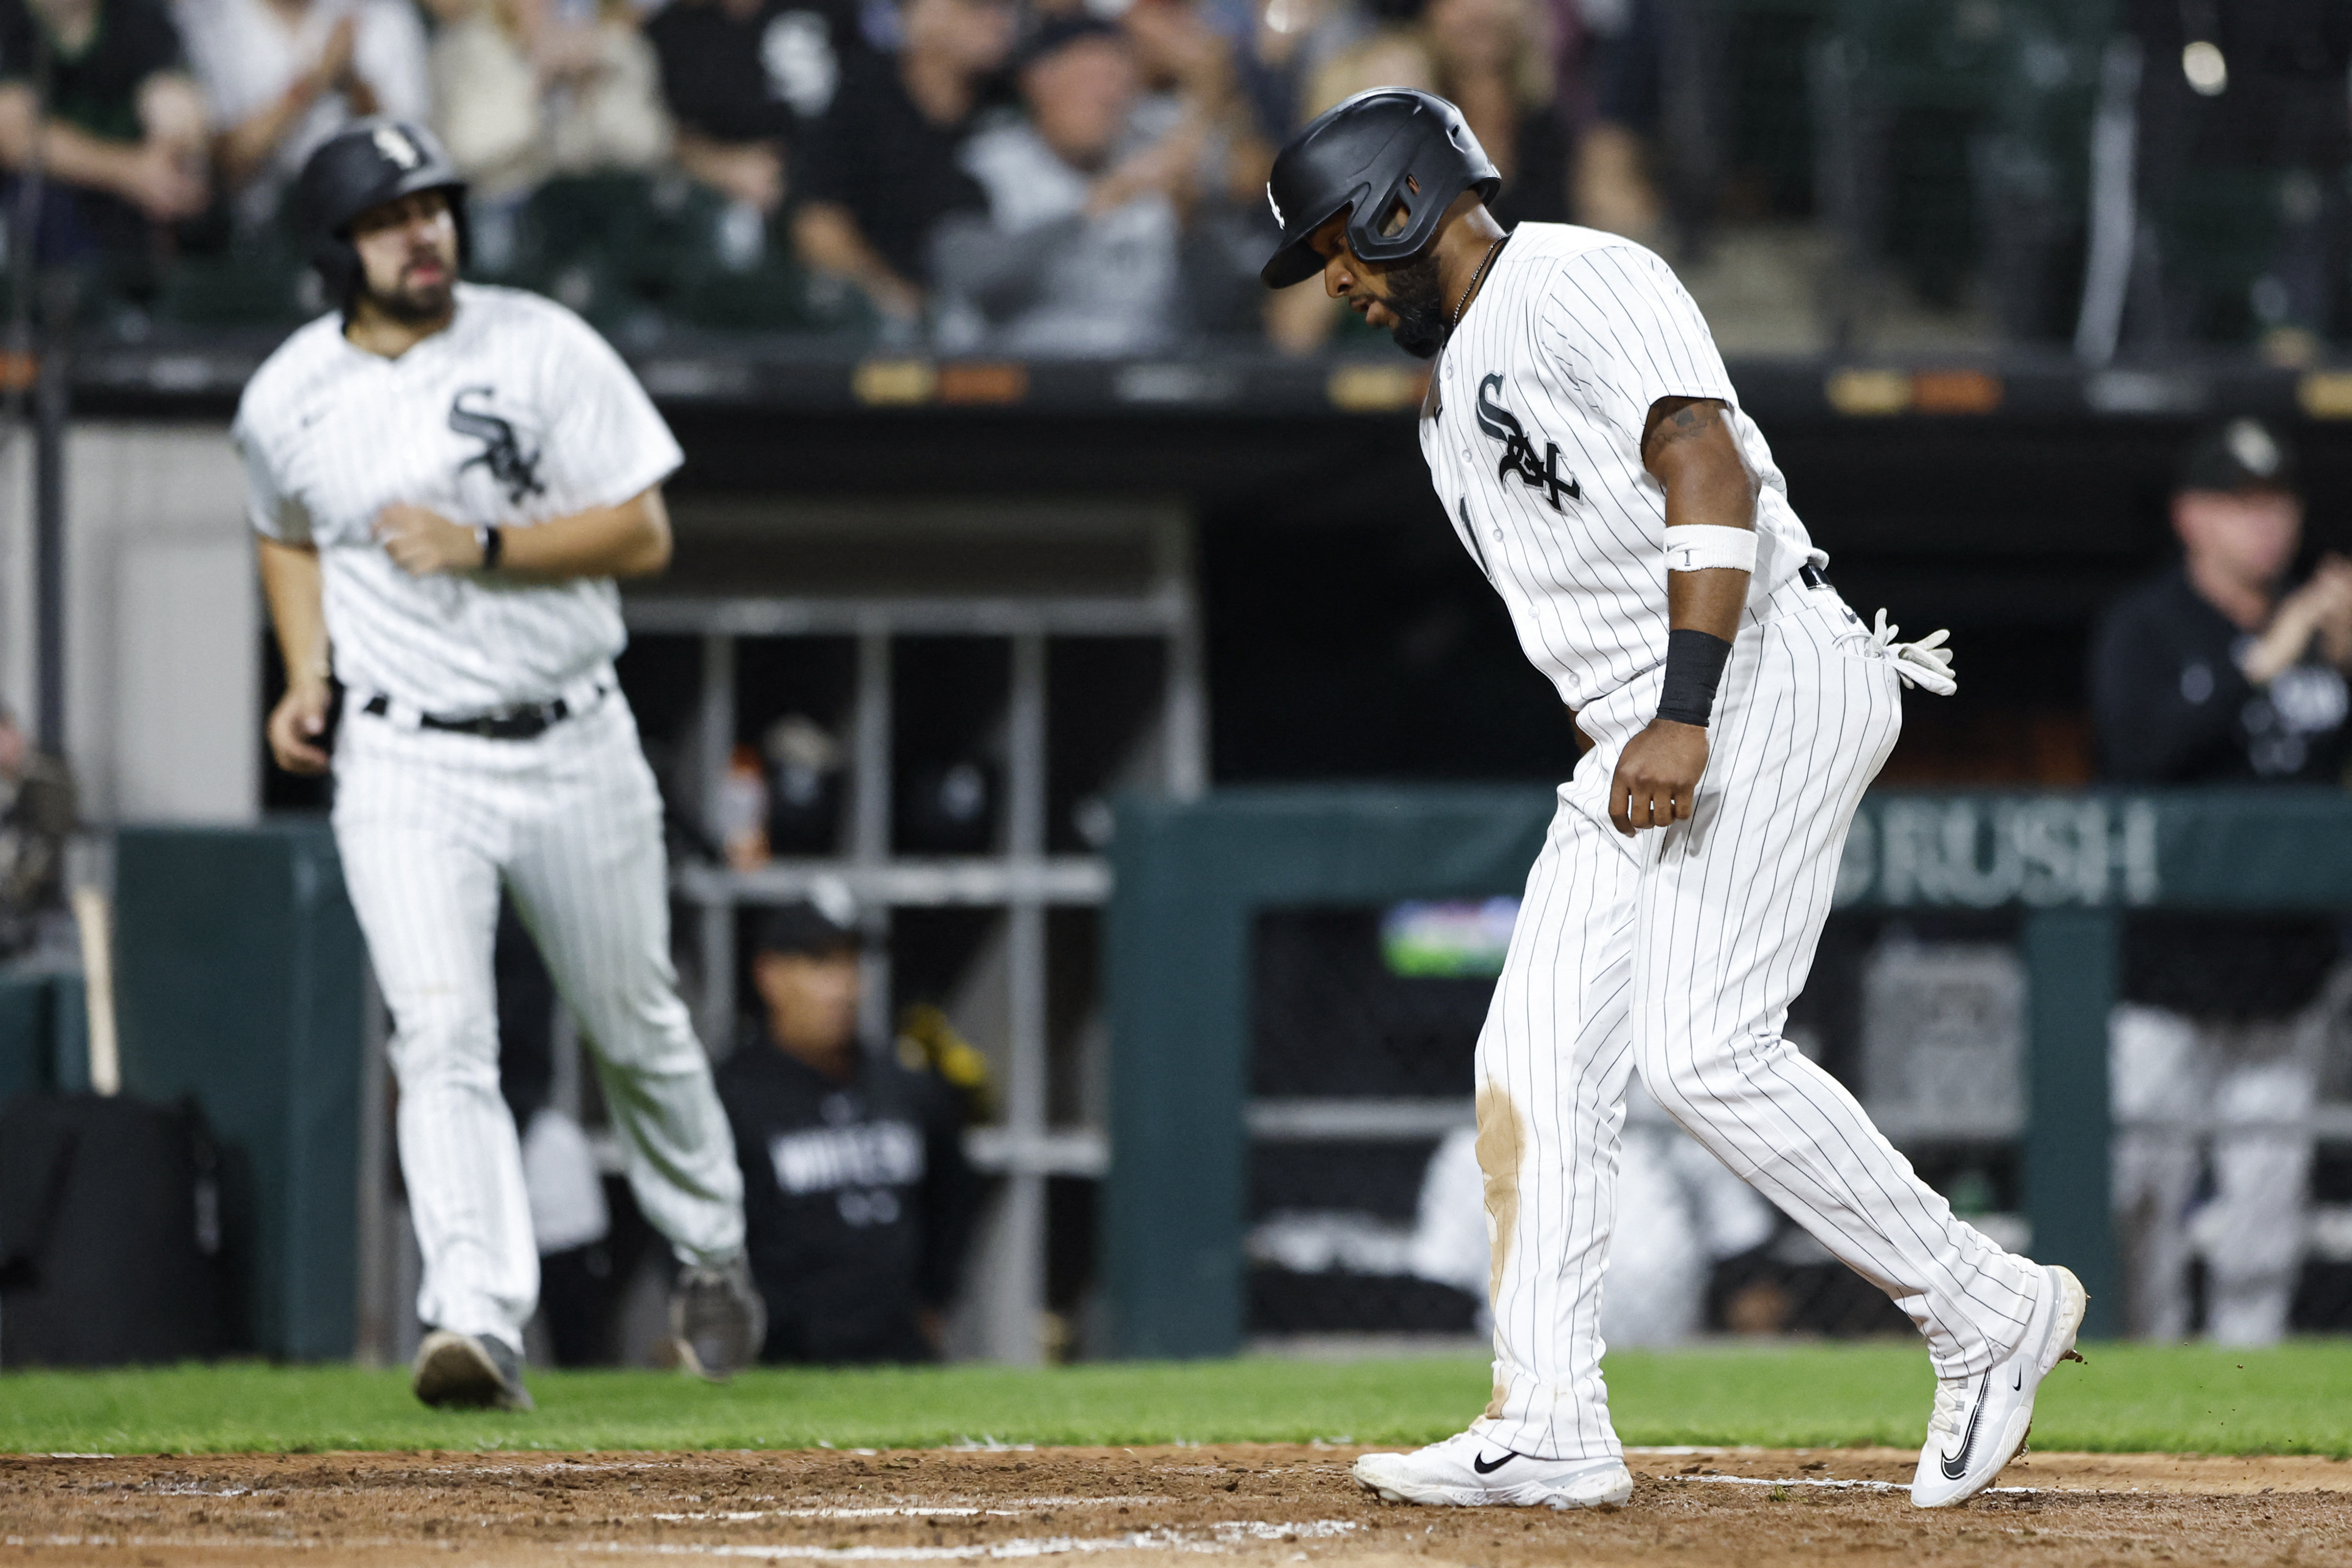 The Chicago White Sox end their losing streak in amazing fashion